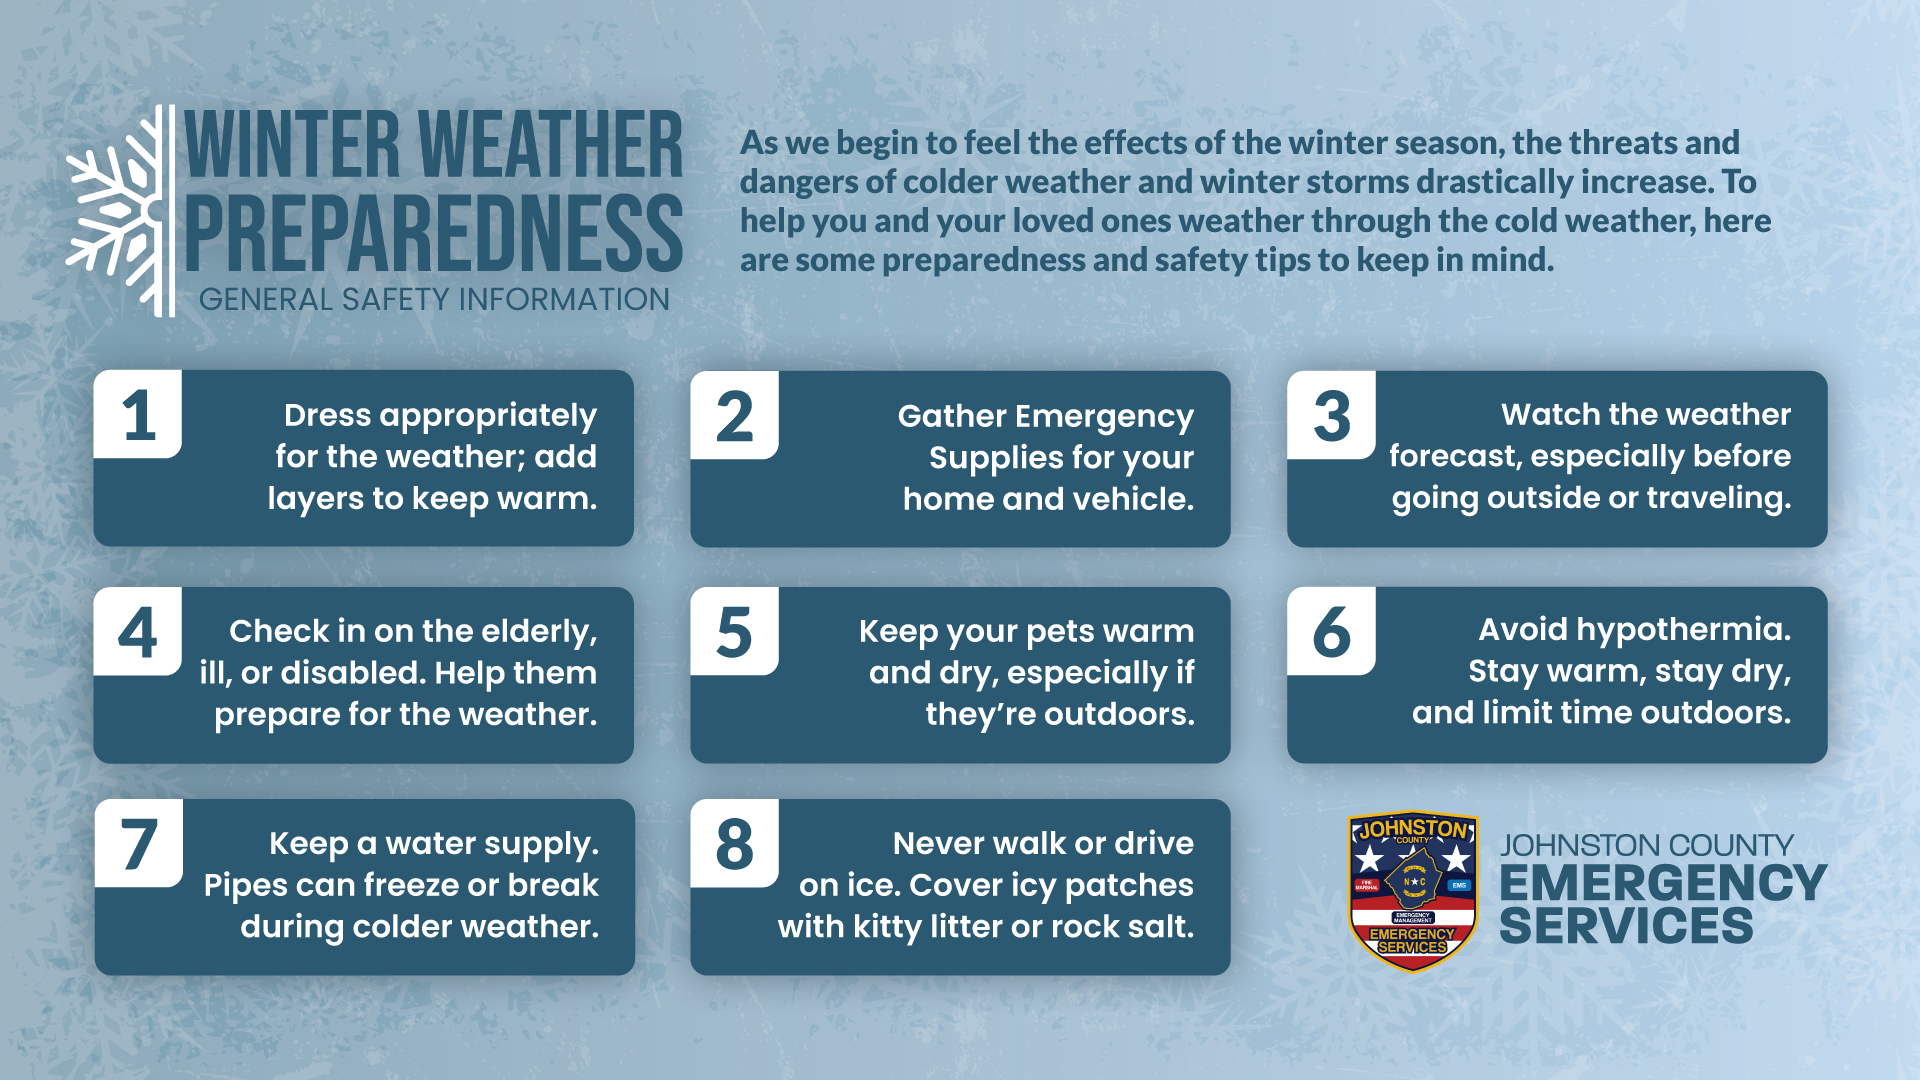 WINTER WEATHER SAFETY TIPS